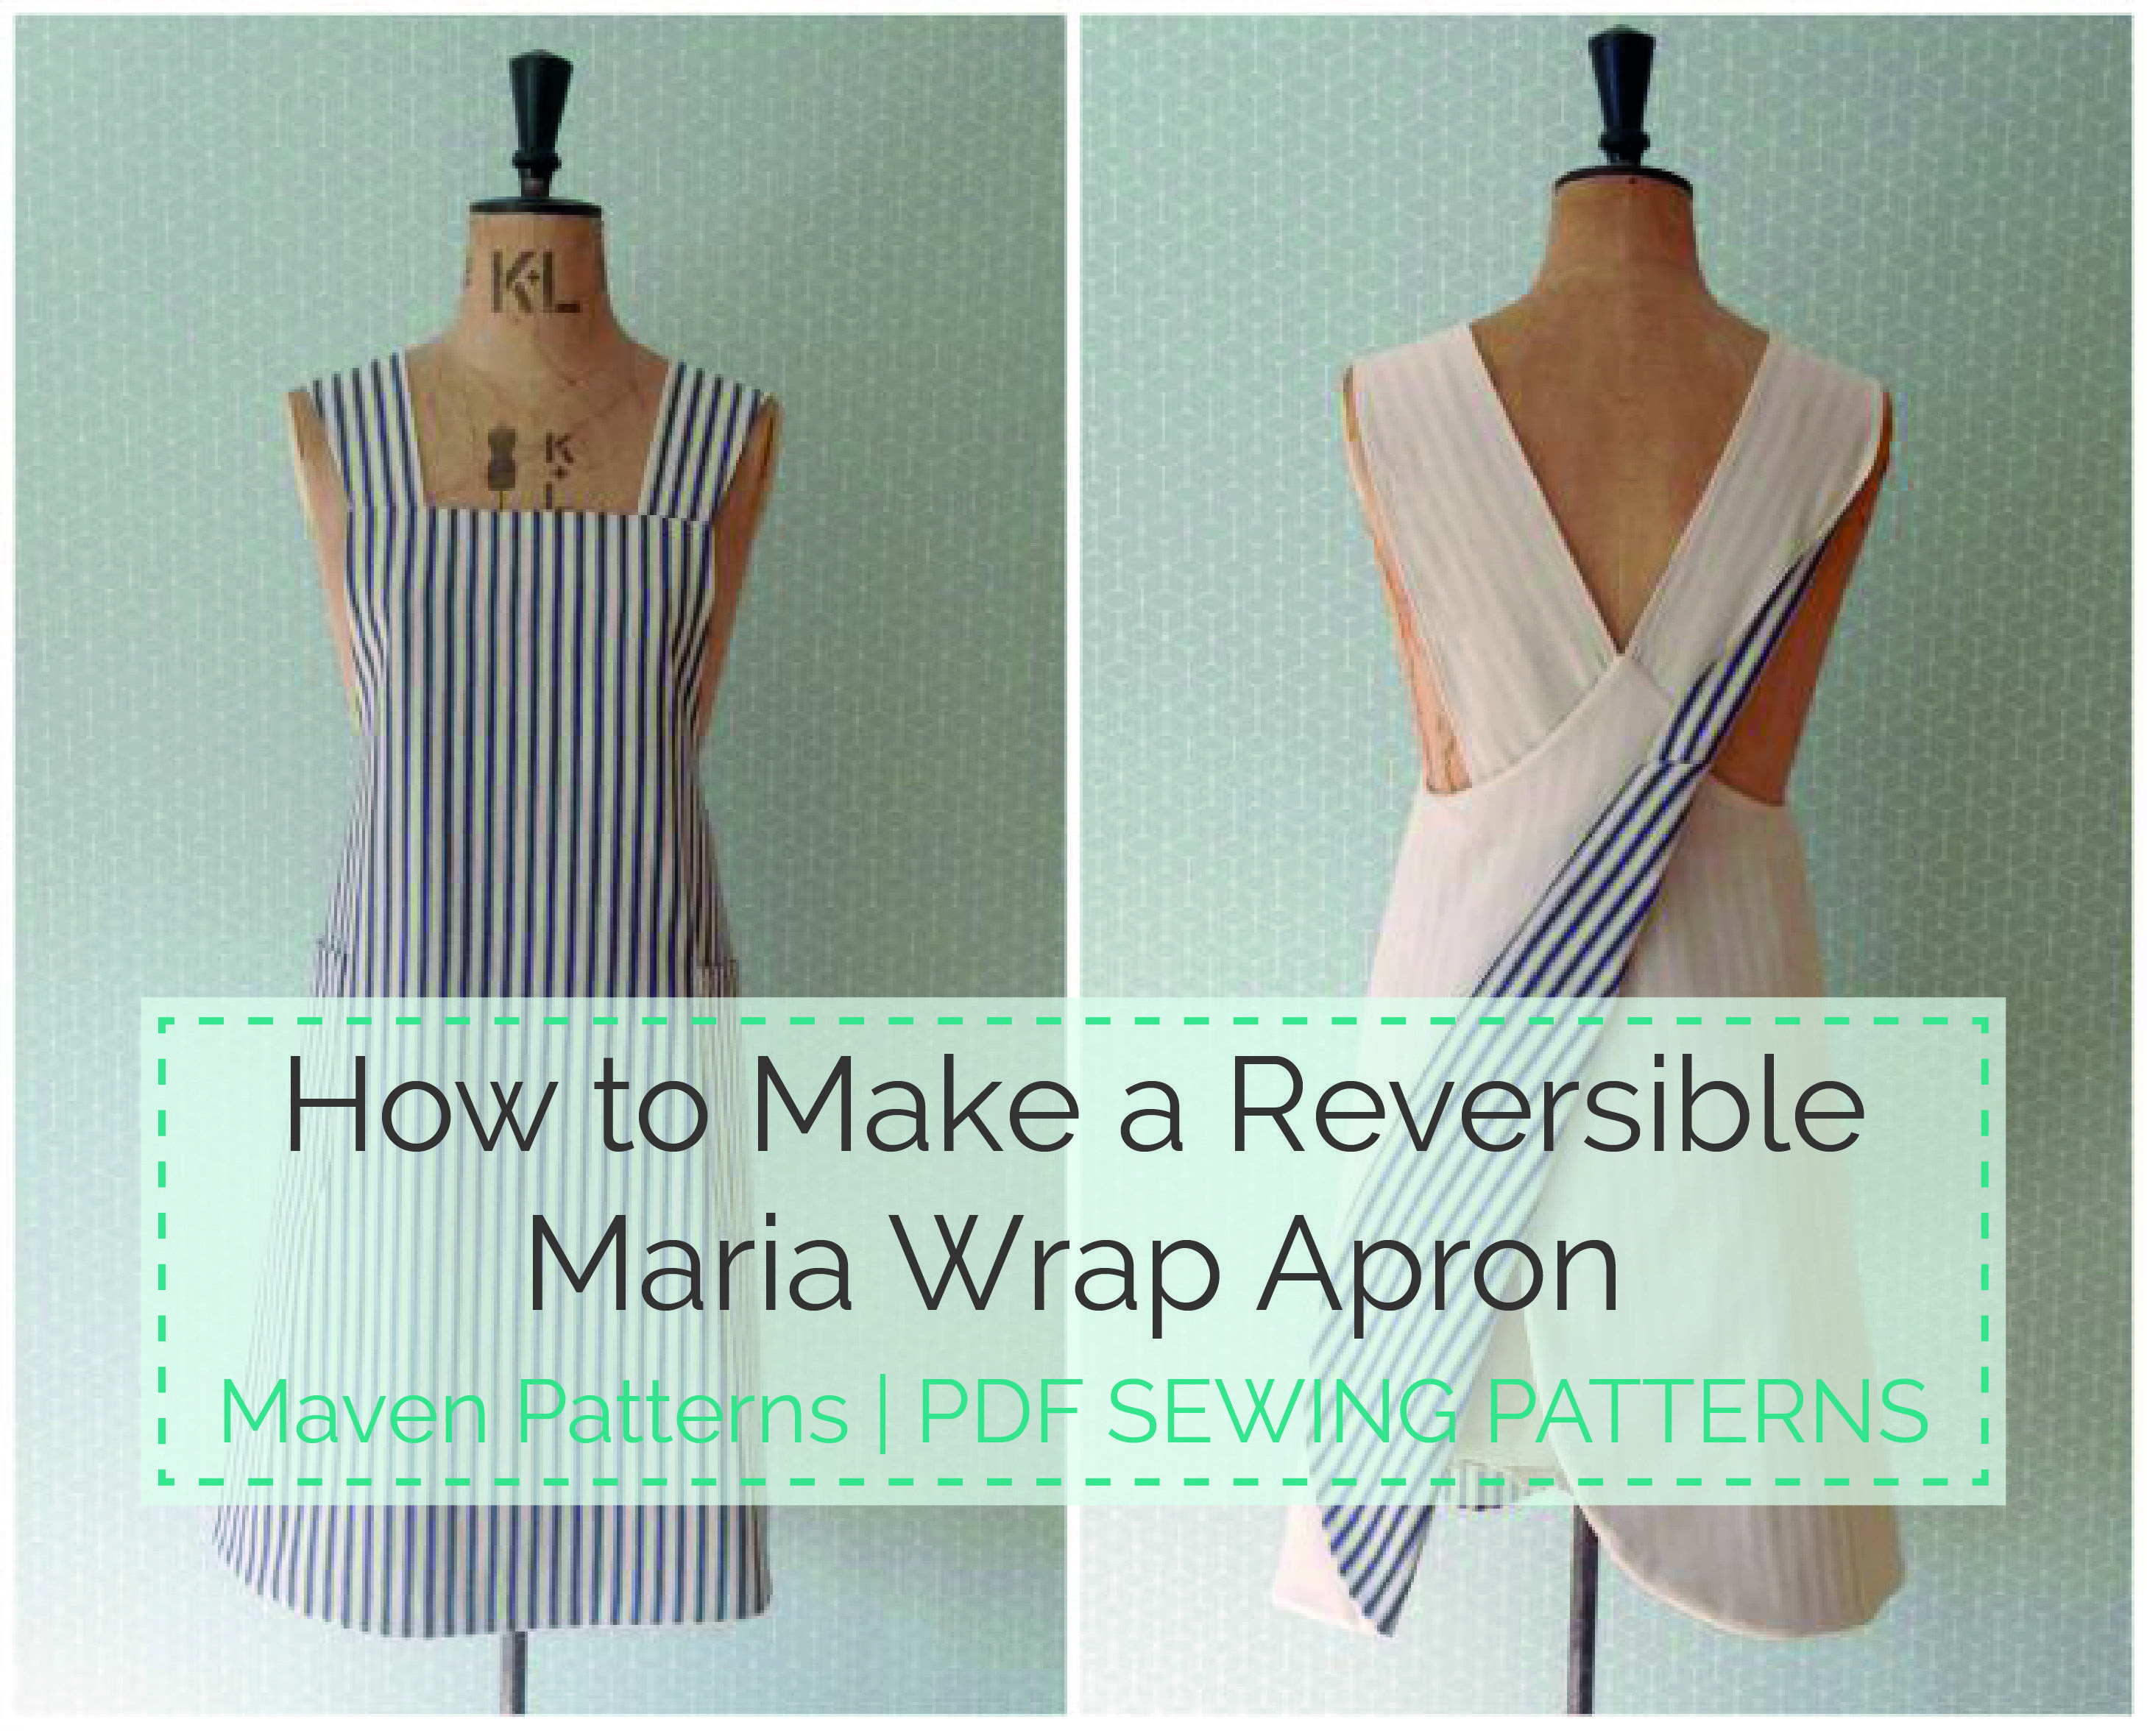 Apron Sewing Pattern The Maria Wrap Apron Reversible Tutorial Schnittmuster Pinterest